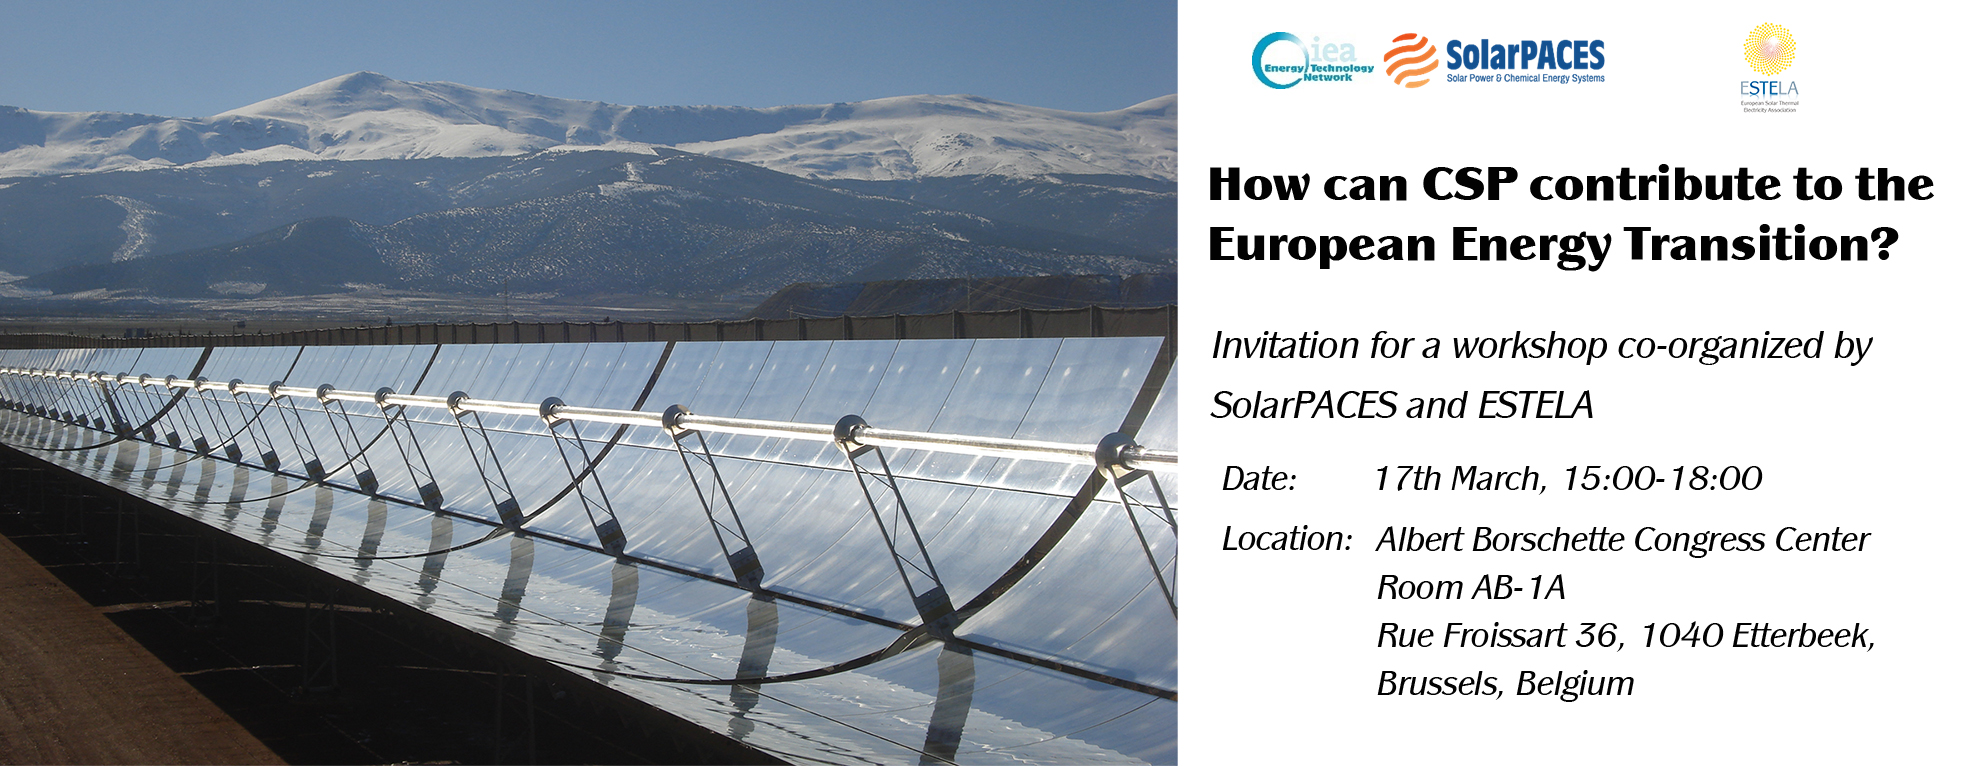 How can CSP contribute to the European Energy Transition?